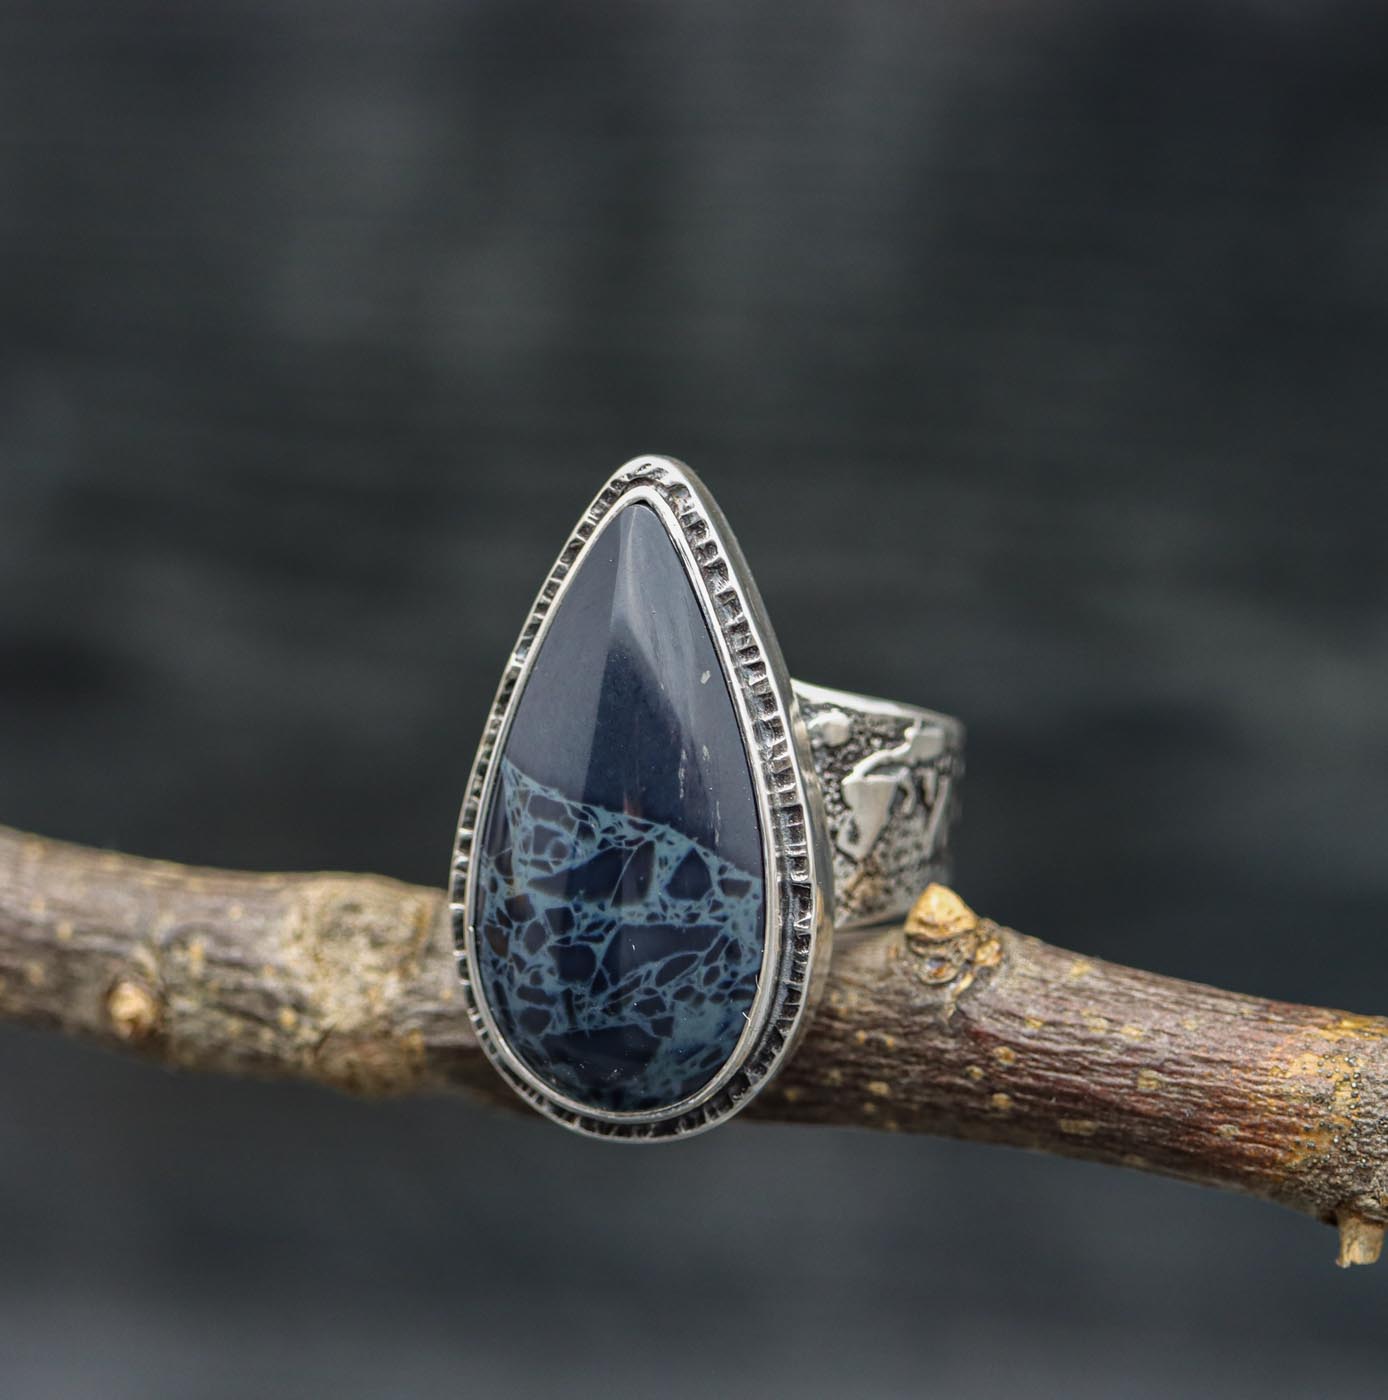 Spiderweb Obsidian Sterling Silver Wide Band Ring